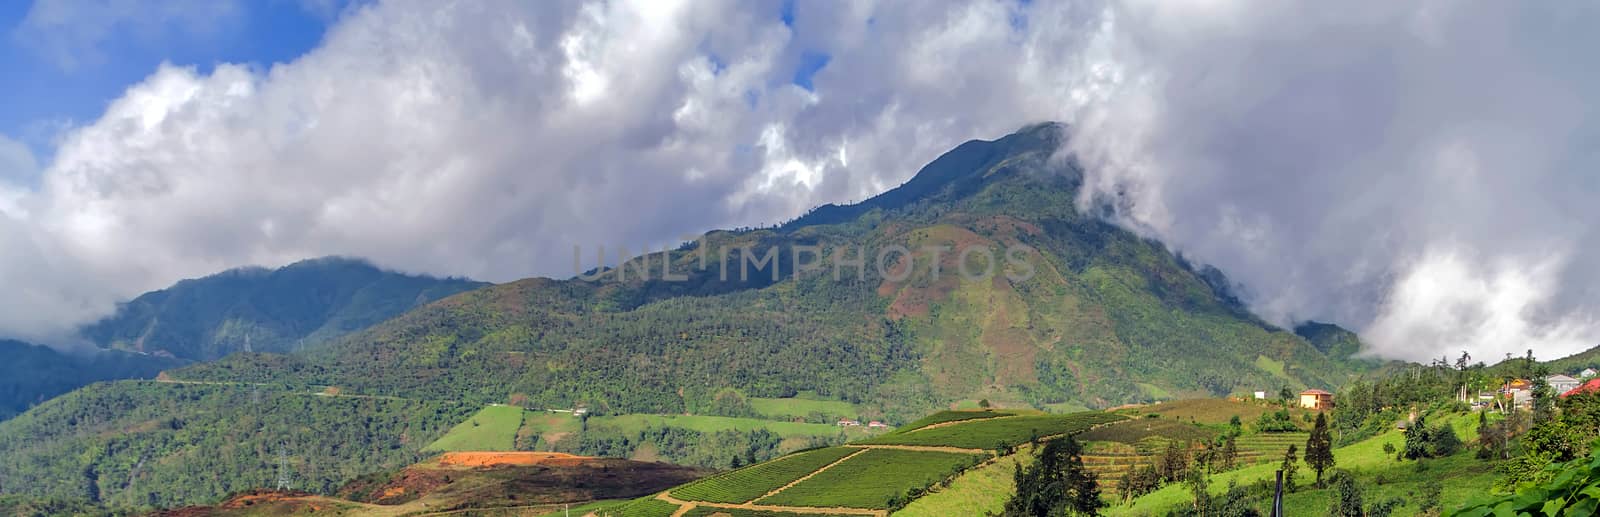 Mountains Vietnam village house Natural landscape with green grass and blue sky